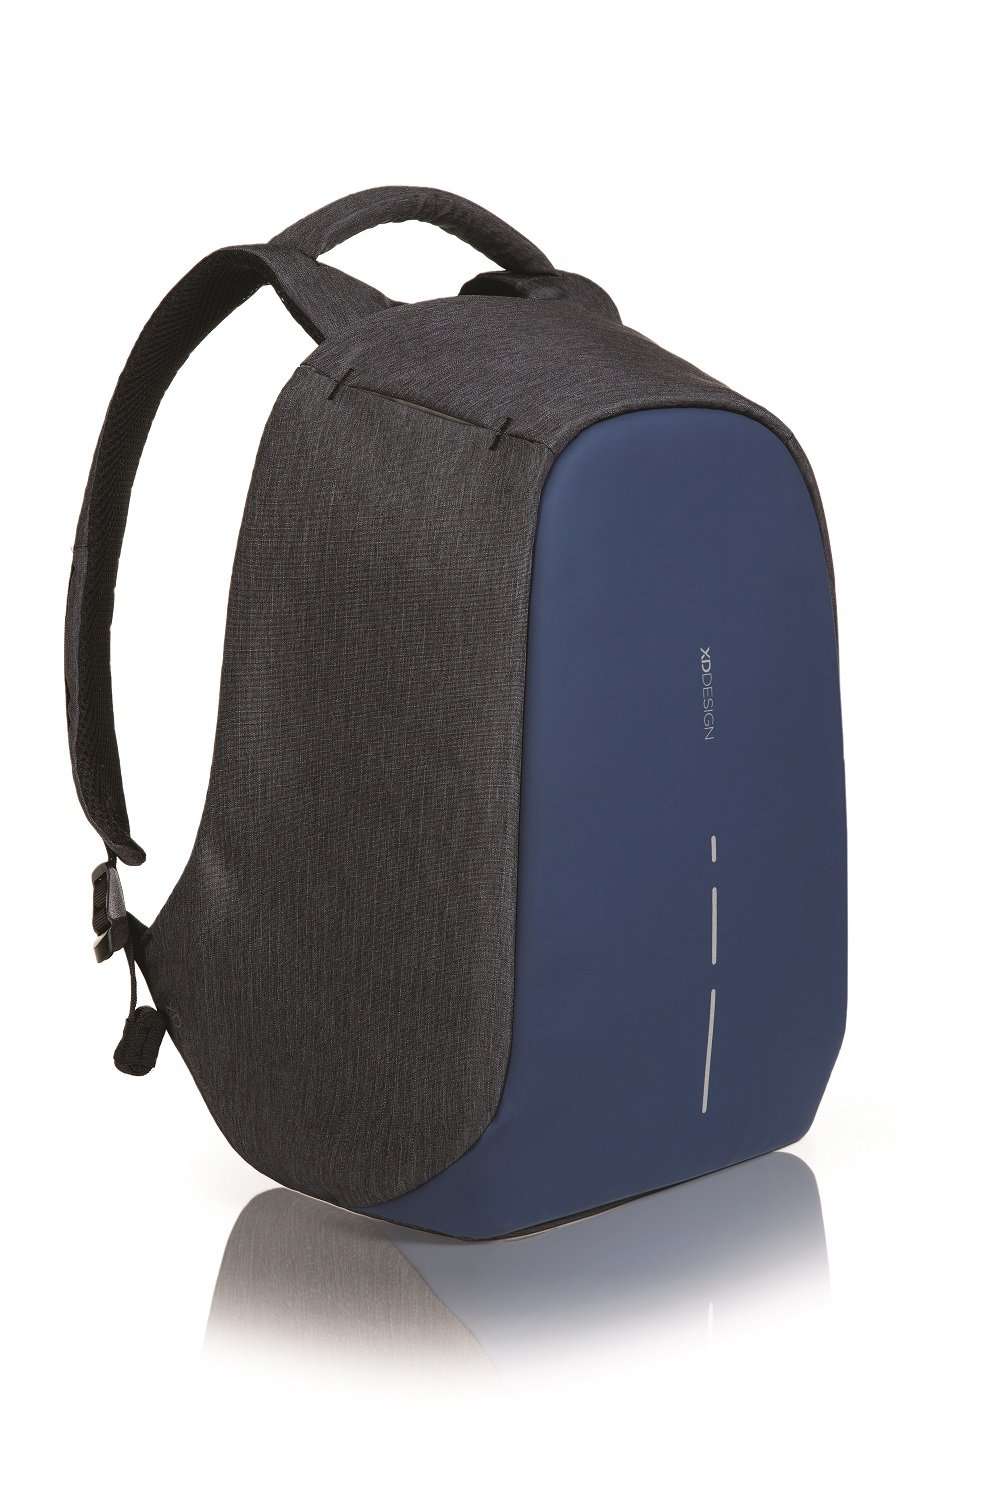 XD Design - Bobby Compact Anti-Theft-Backpack - Diver Blue (p705.535)